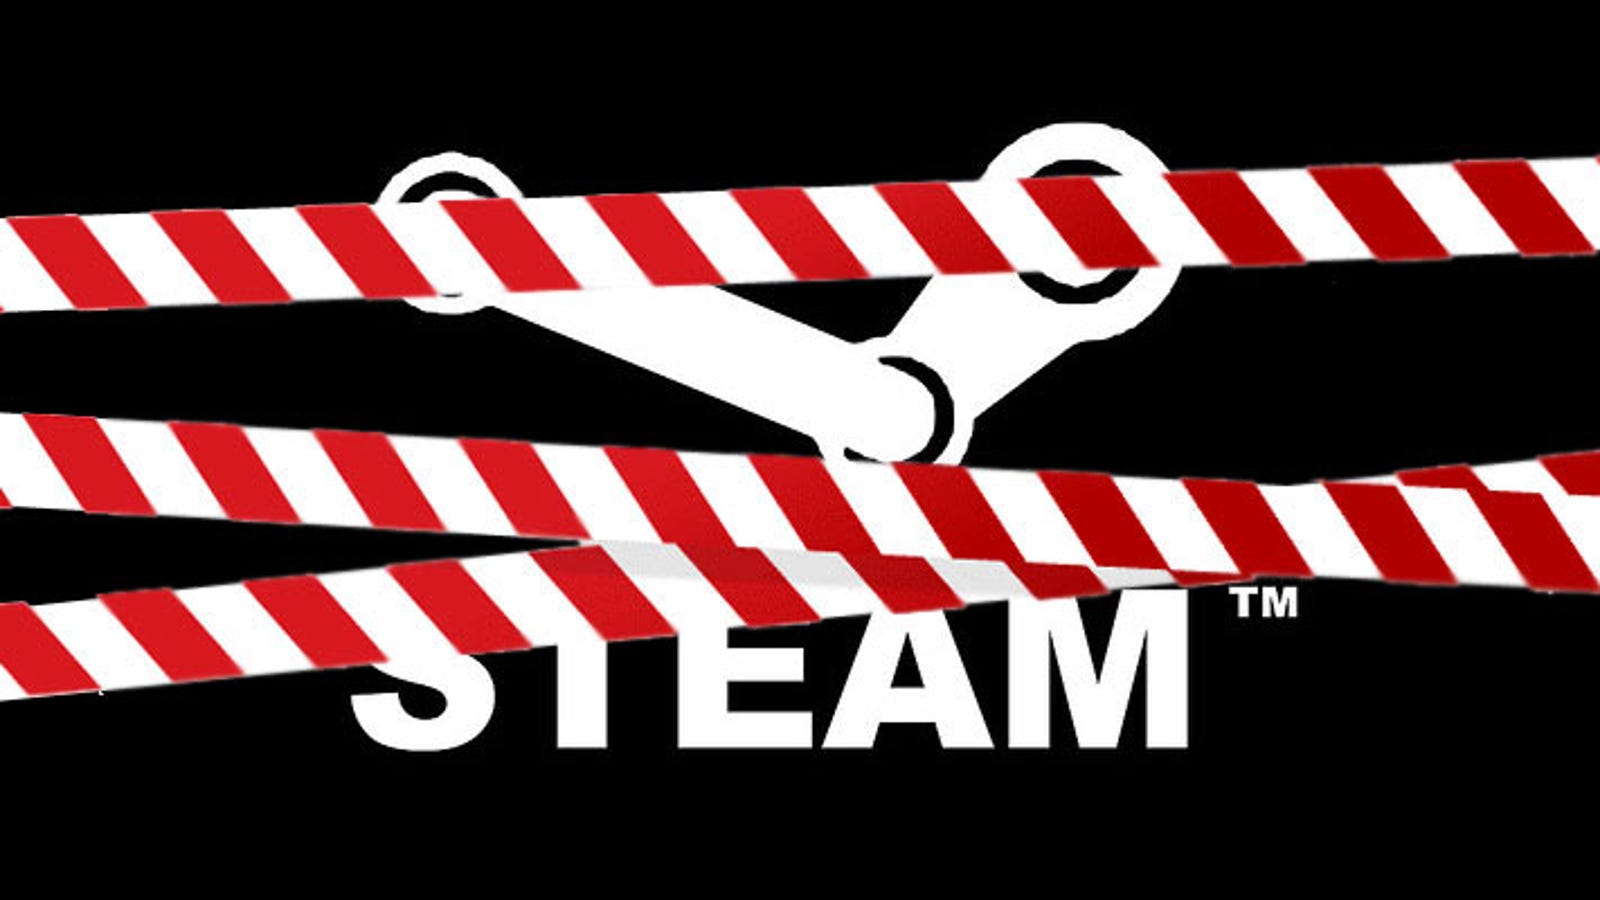 Steam is down today фото 79